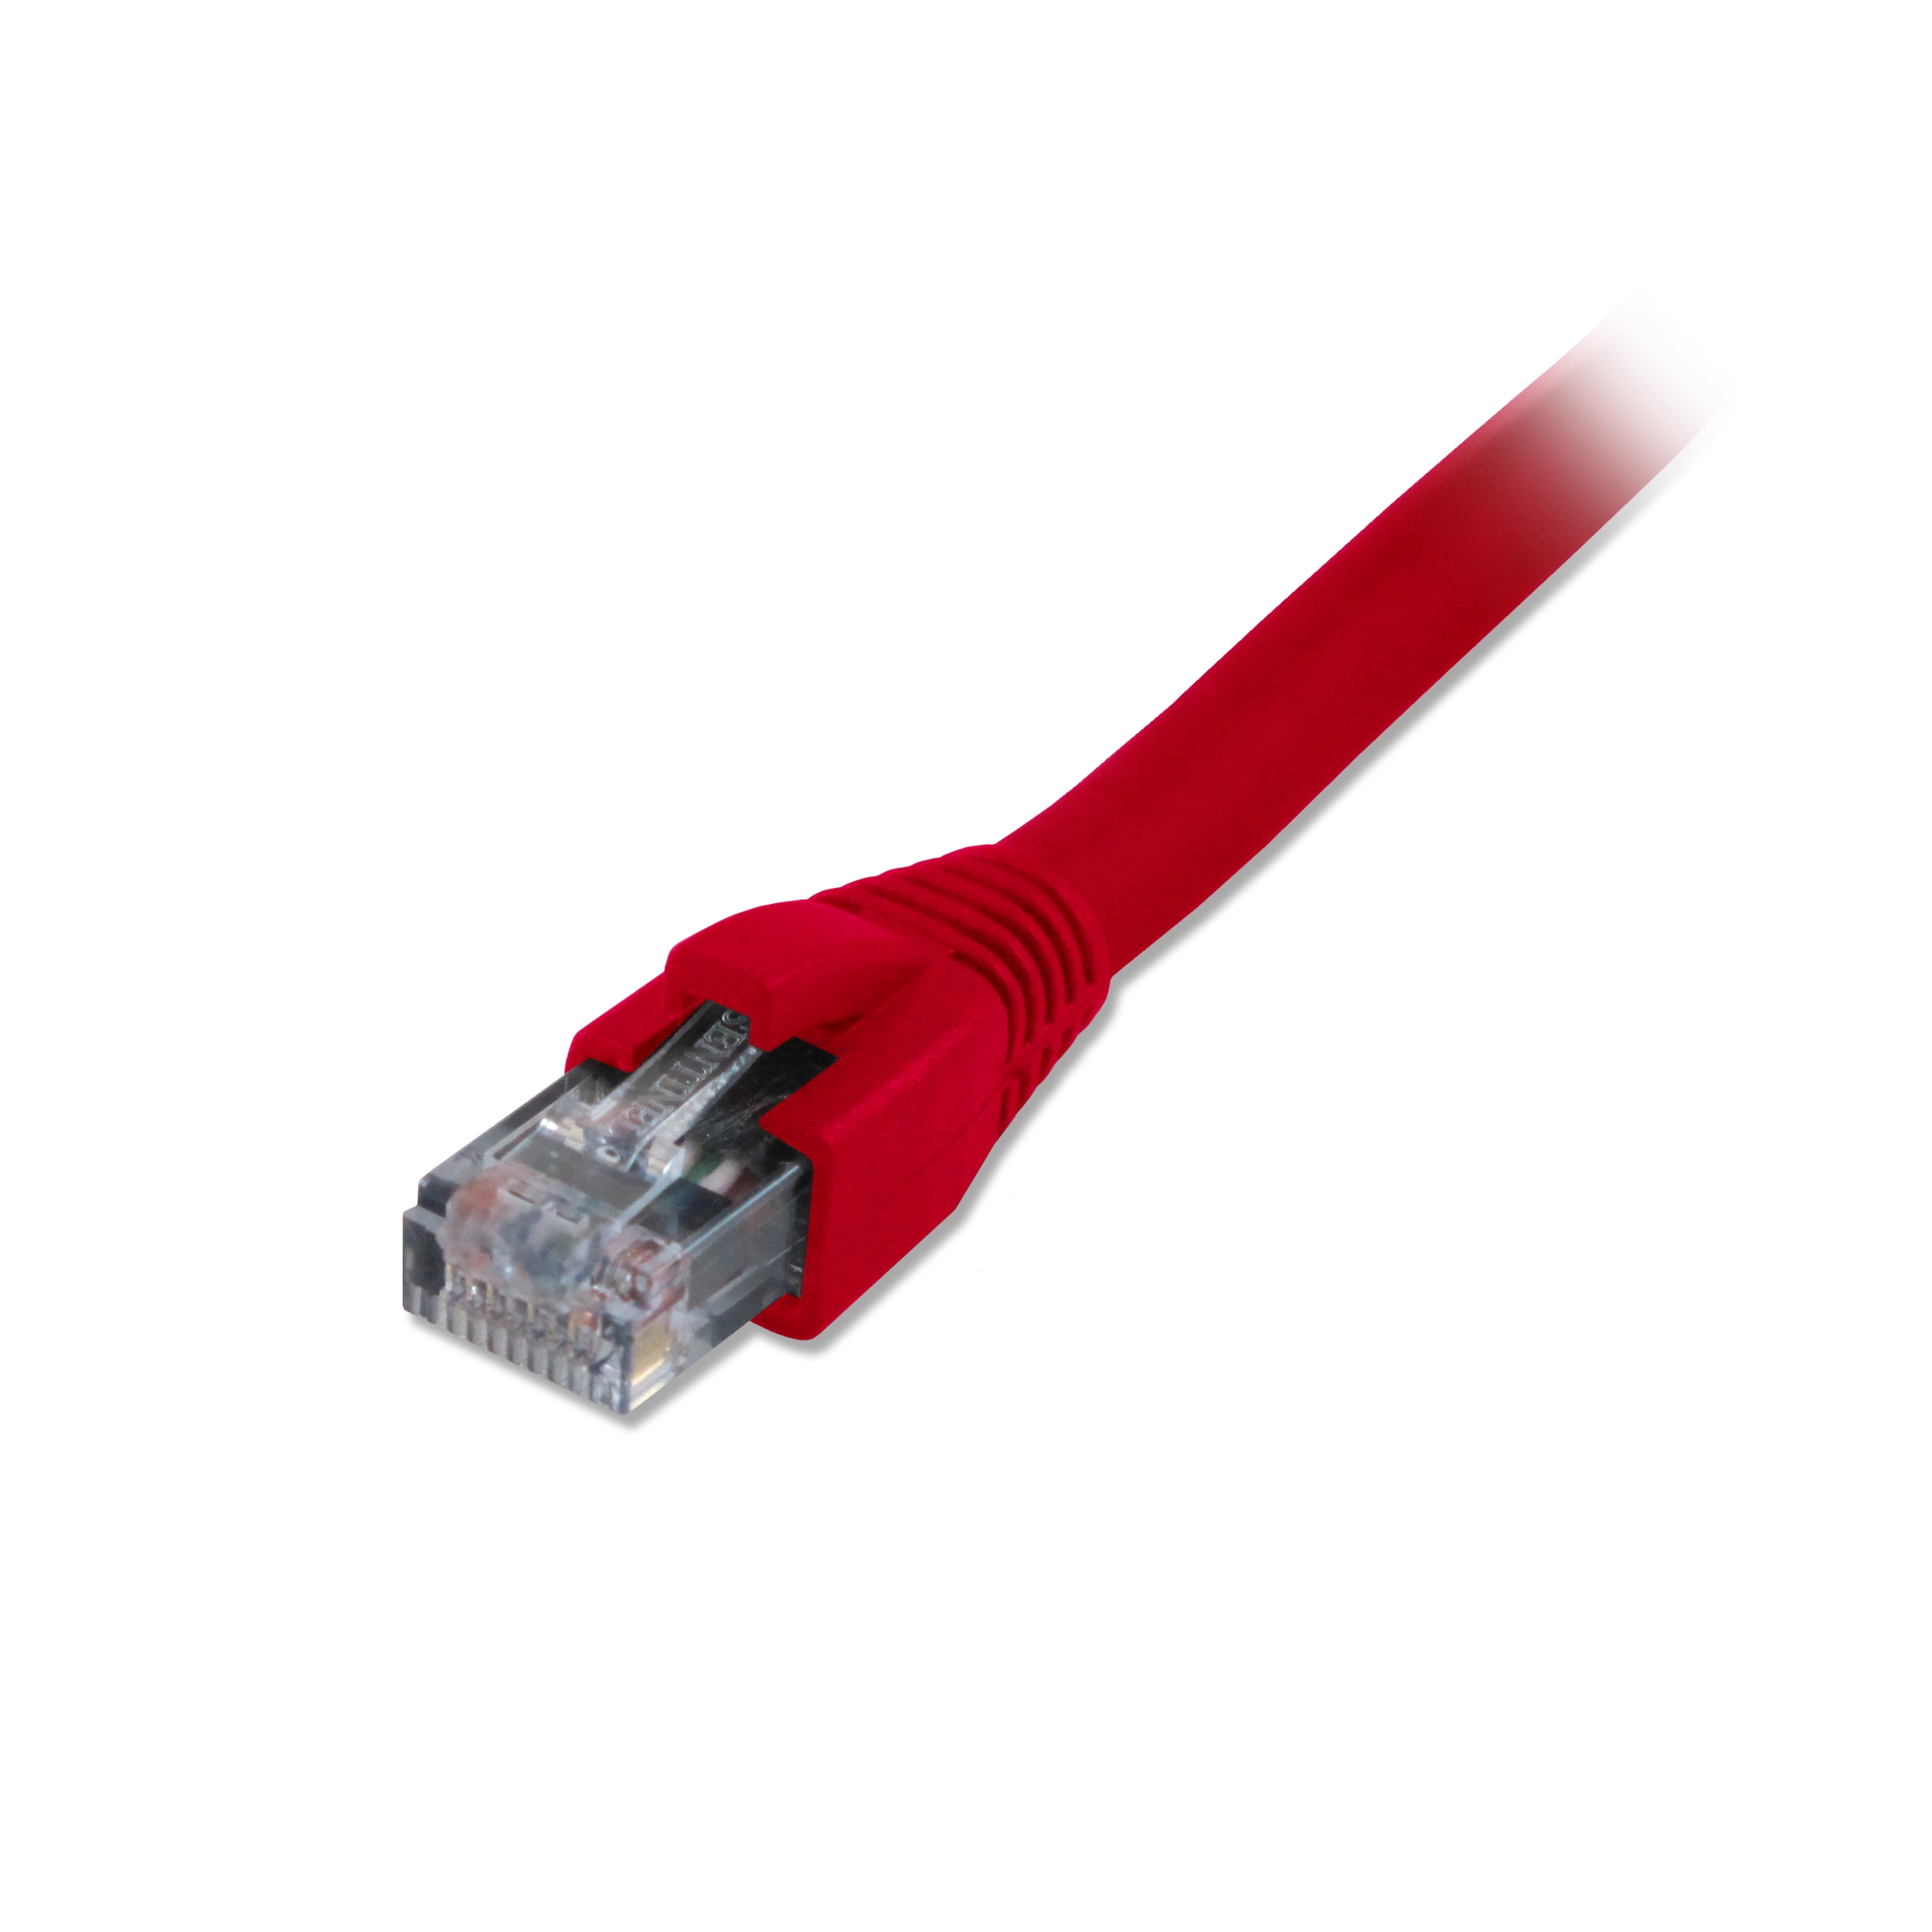 Comprehensive CAT5-350-5RED Cat5e 350 Mhz Snagless Patch Cable 5ft Red